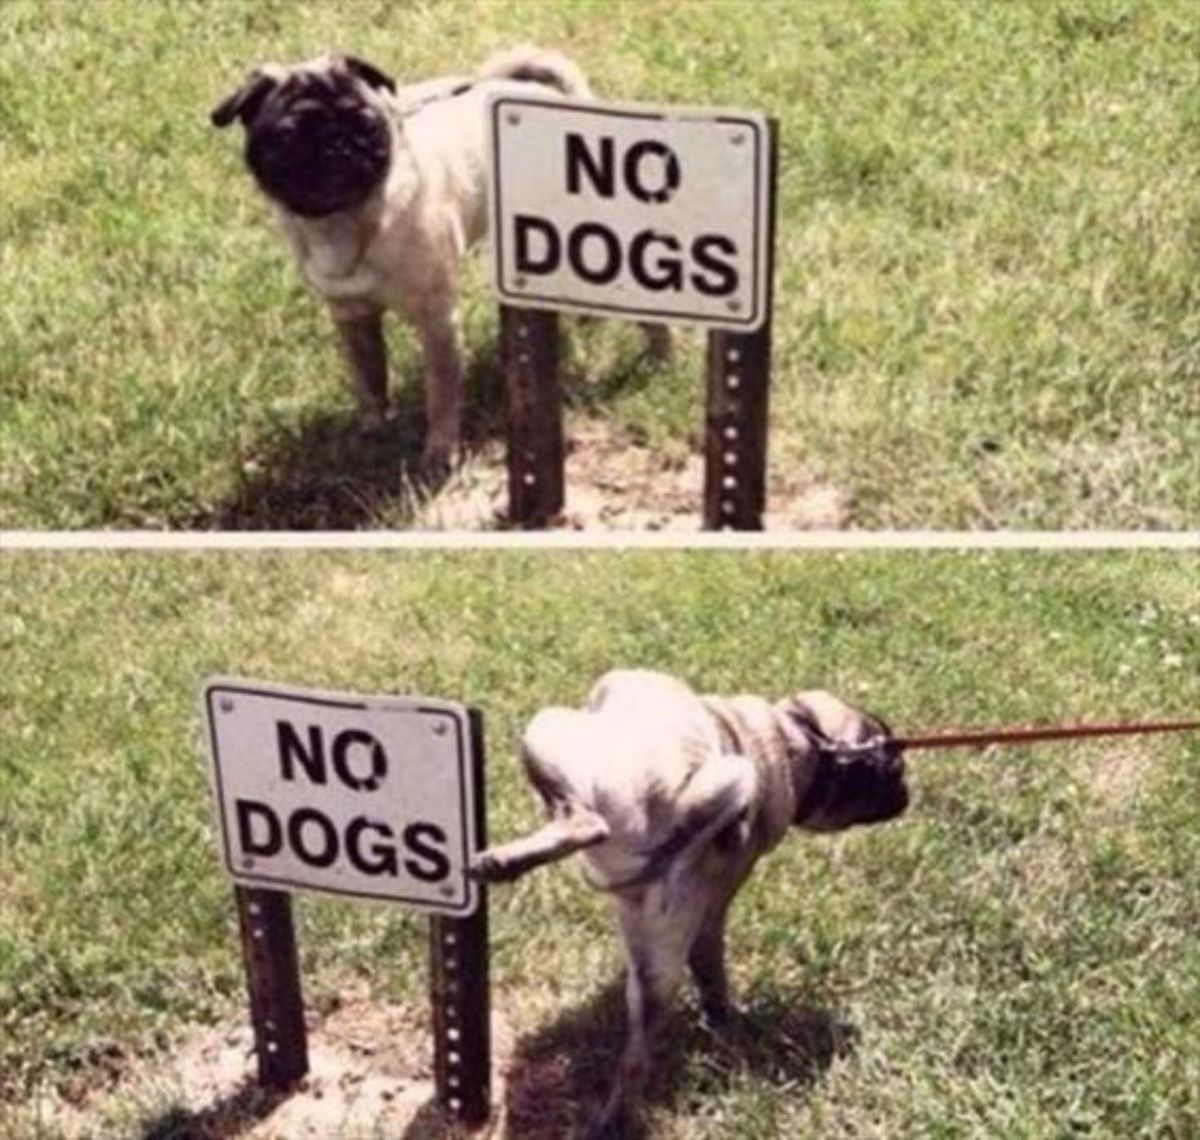 two photos of a brown pug standing by and then urinating on a NO DOGS sign on grass